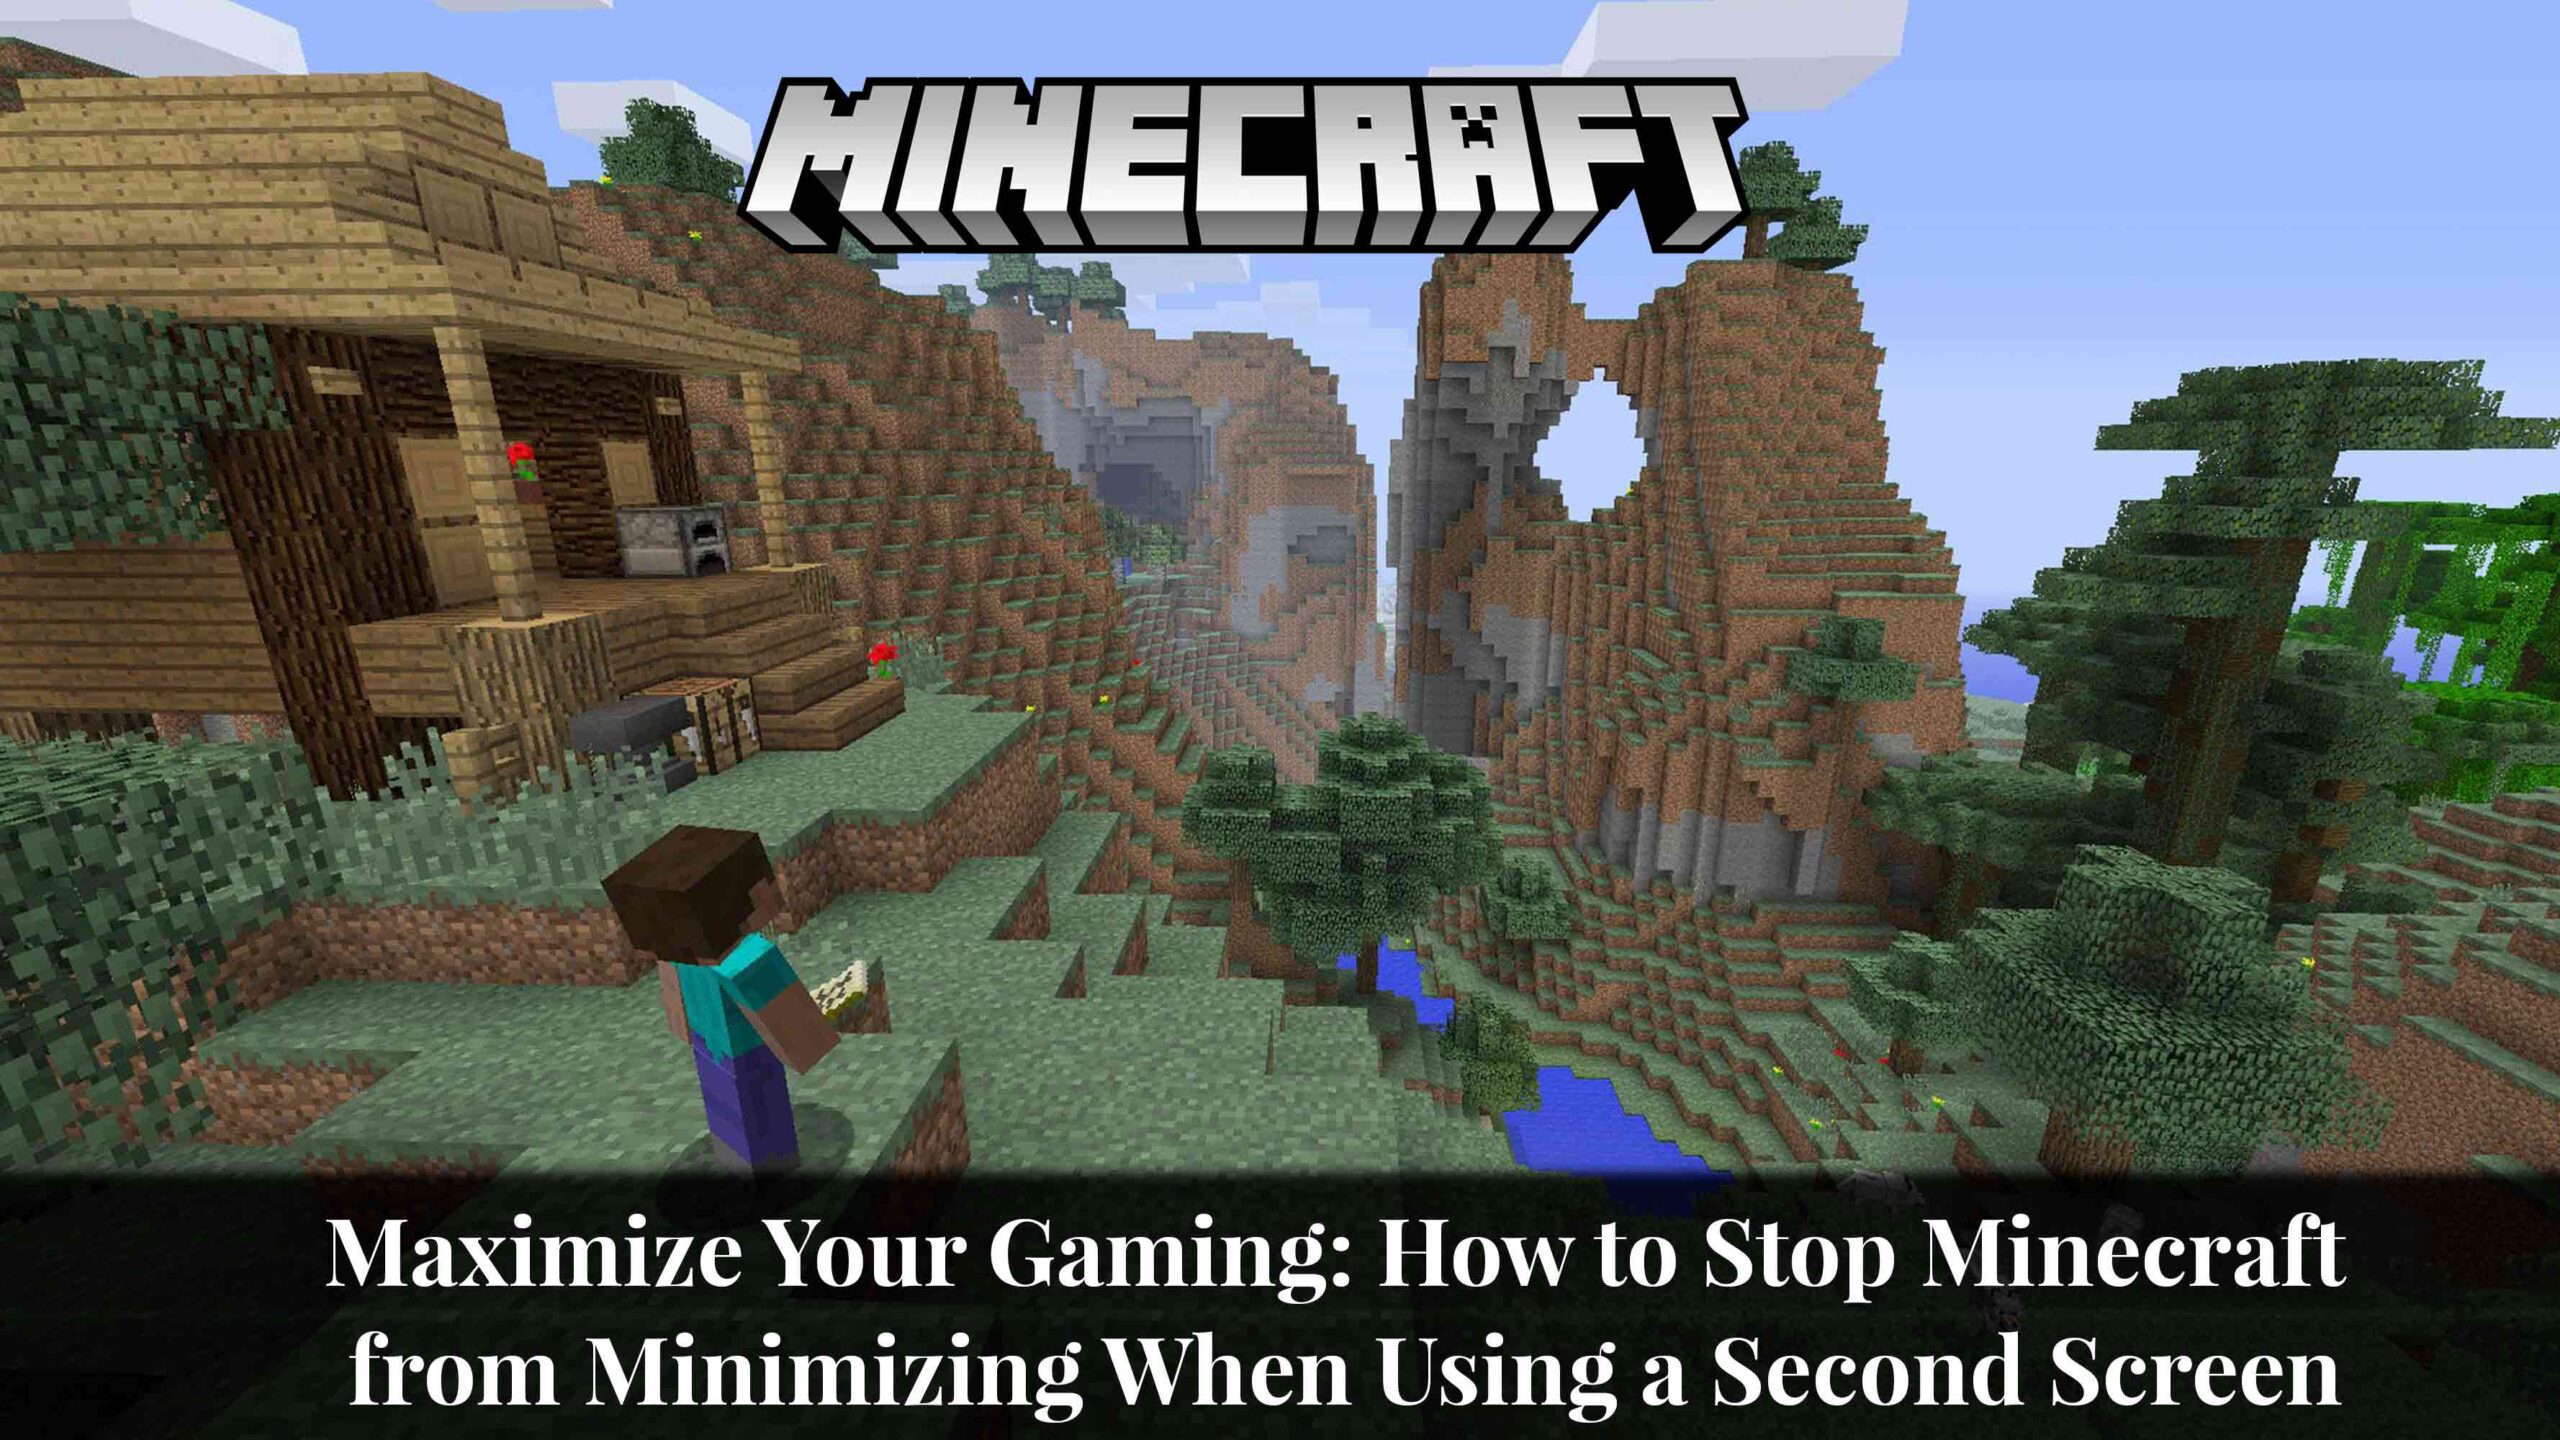 How to Stop Minecraft from Minimizing When Using a Second Screen